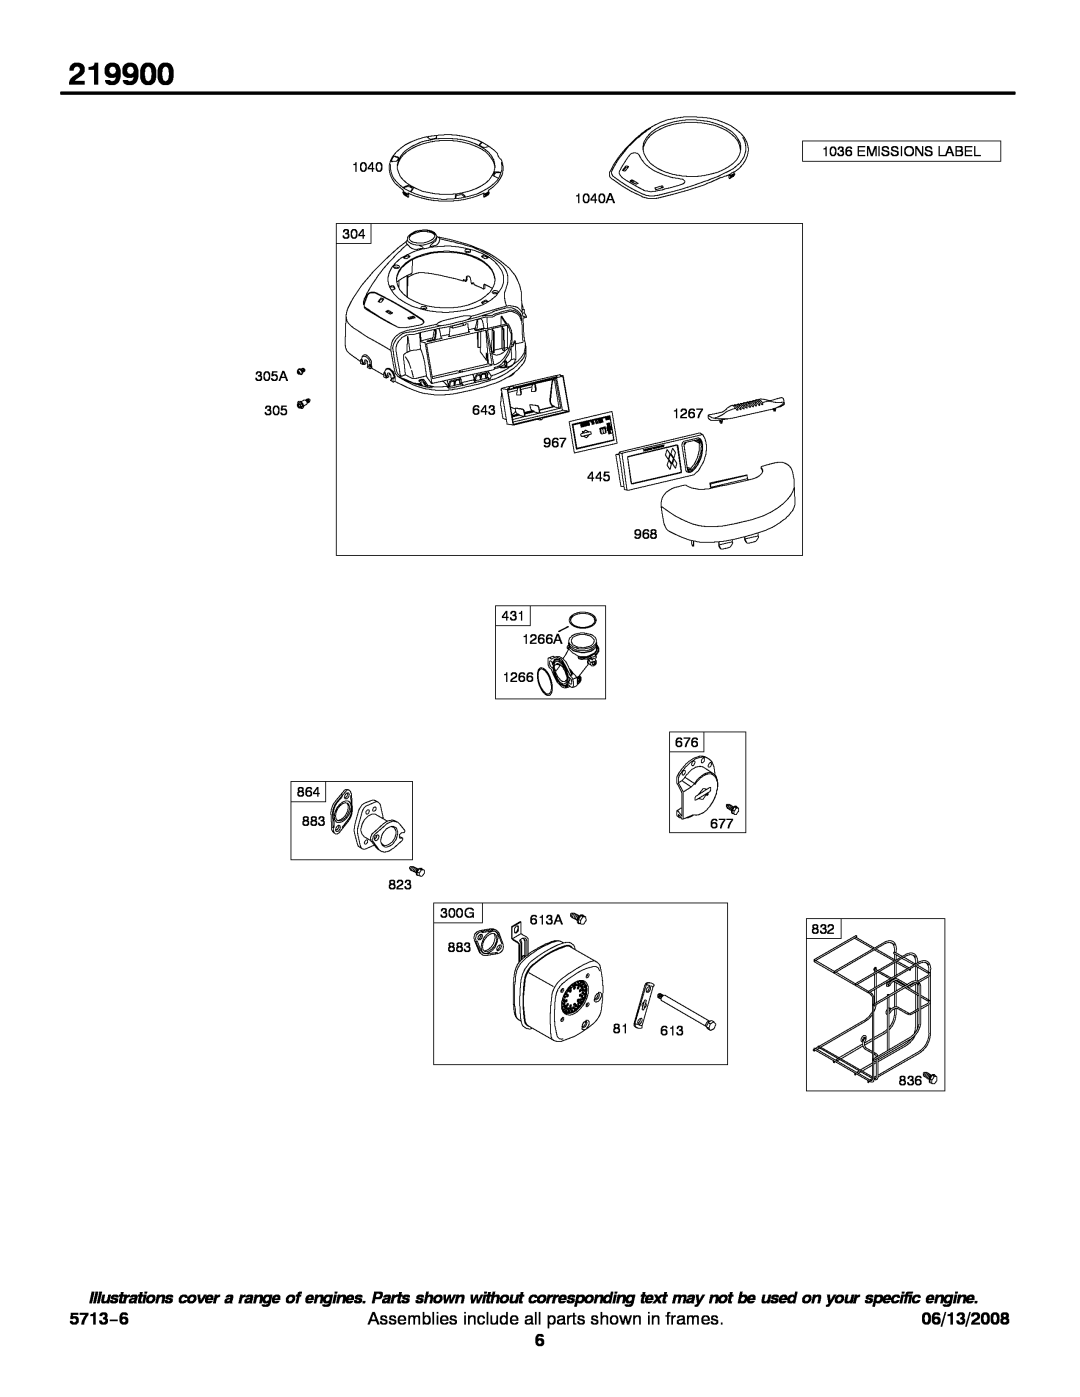 Snapper 219900 service manual 5713−6, Assemblies include all parts shown in frames, 06/13/2008 